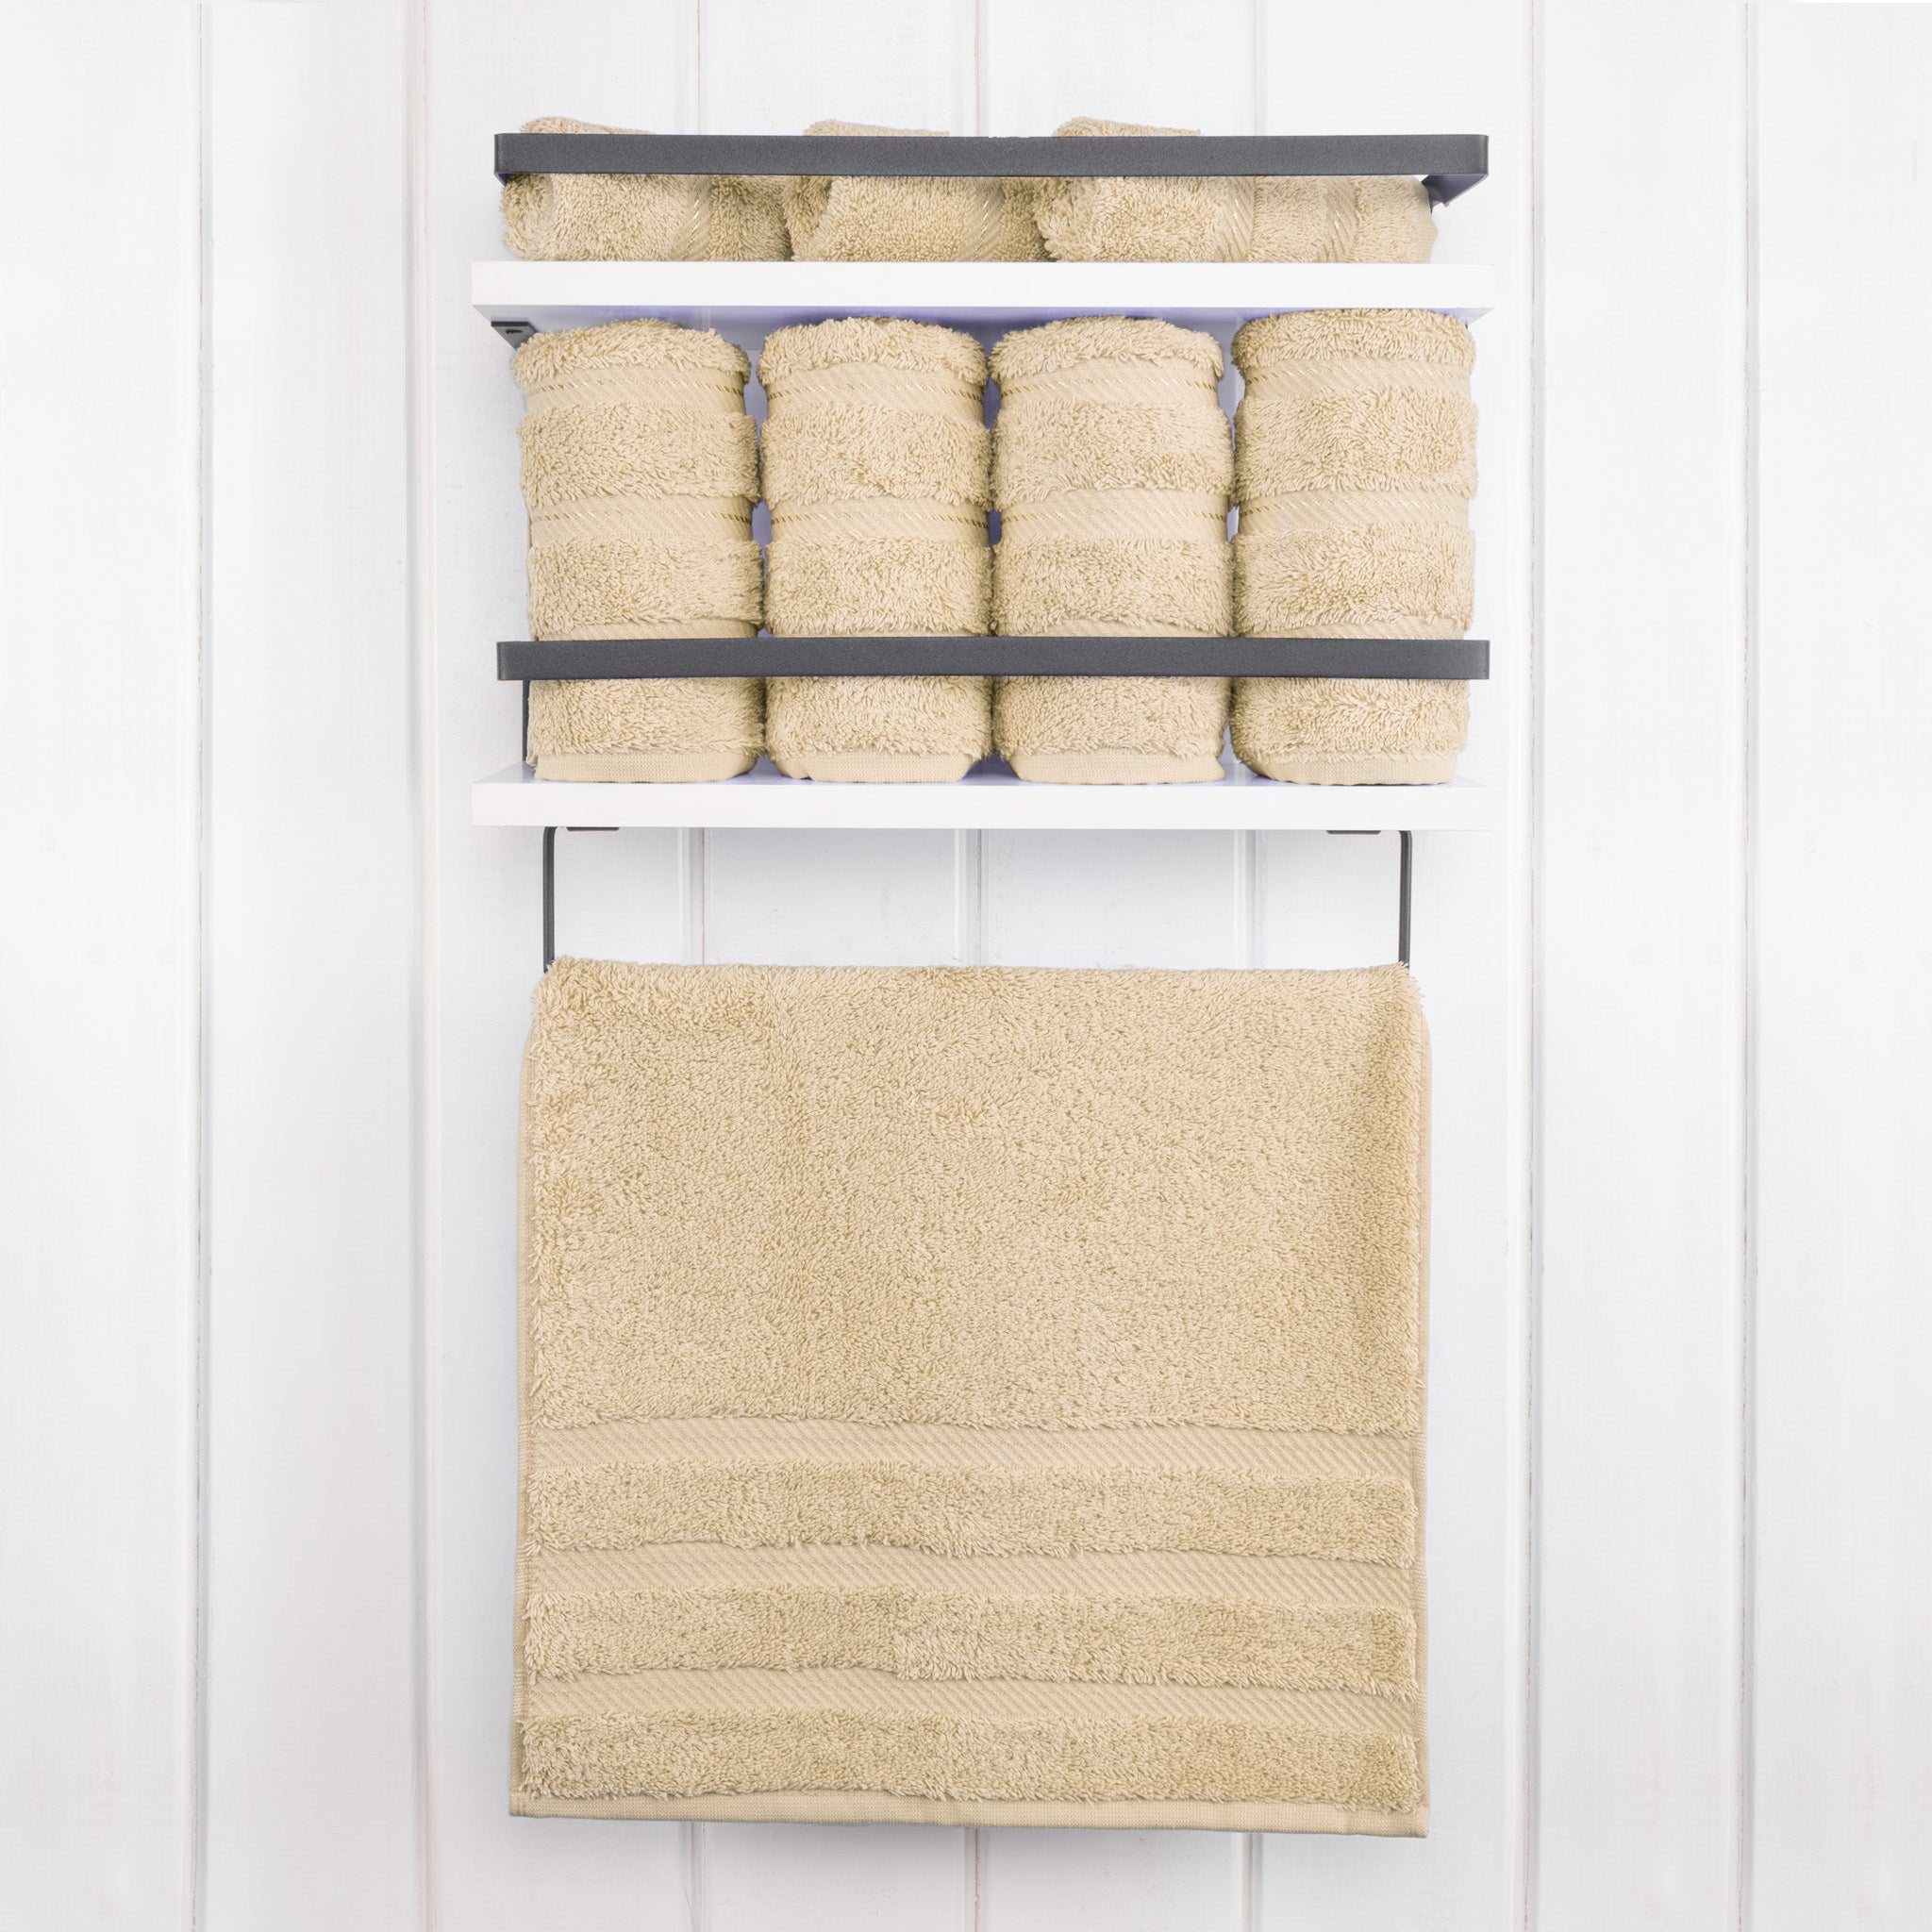  American Soft Linen 100% Turkish Cotton 4 Pack Hand Towel Set  sand-taupe-2